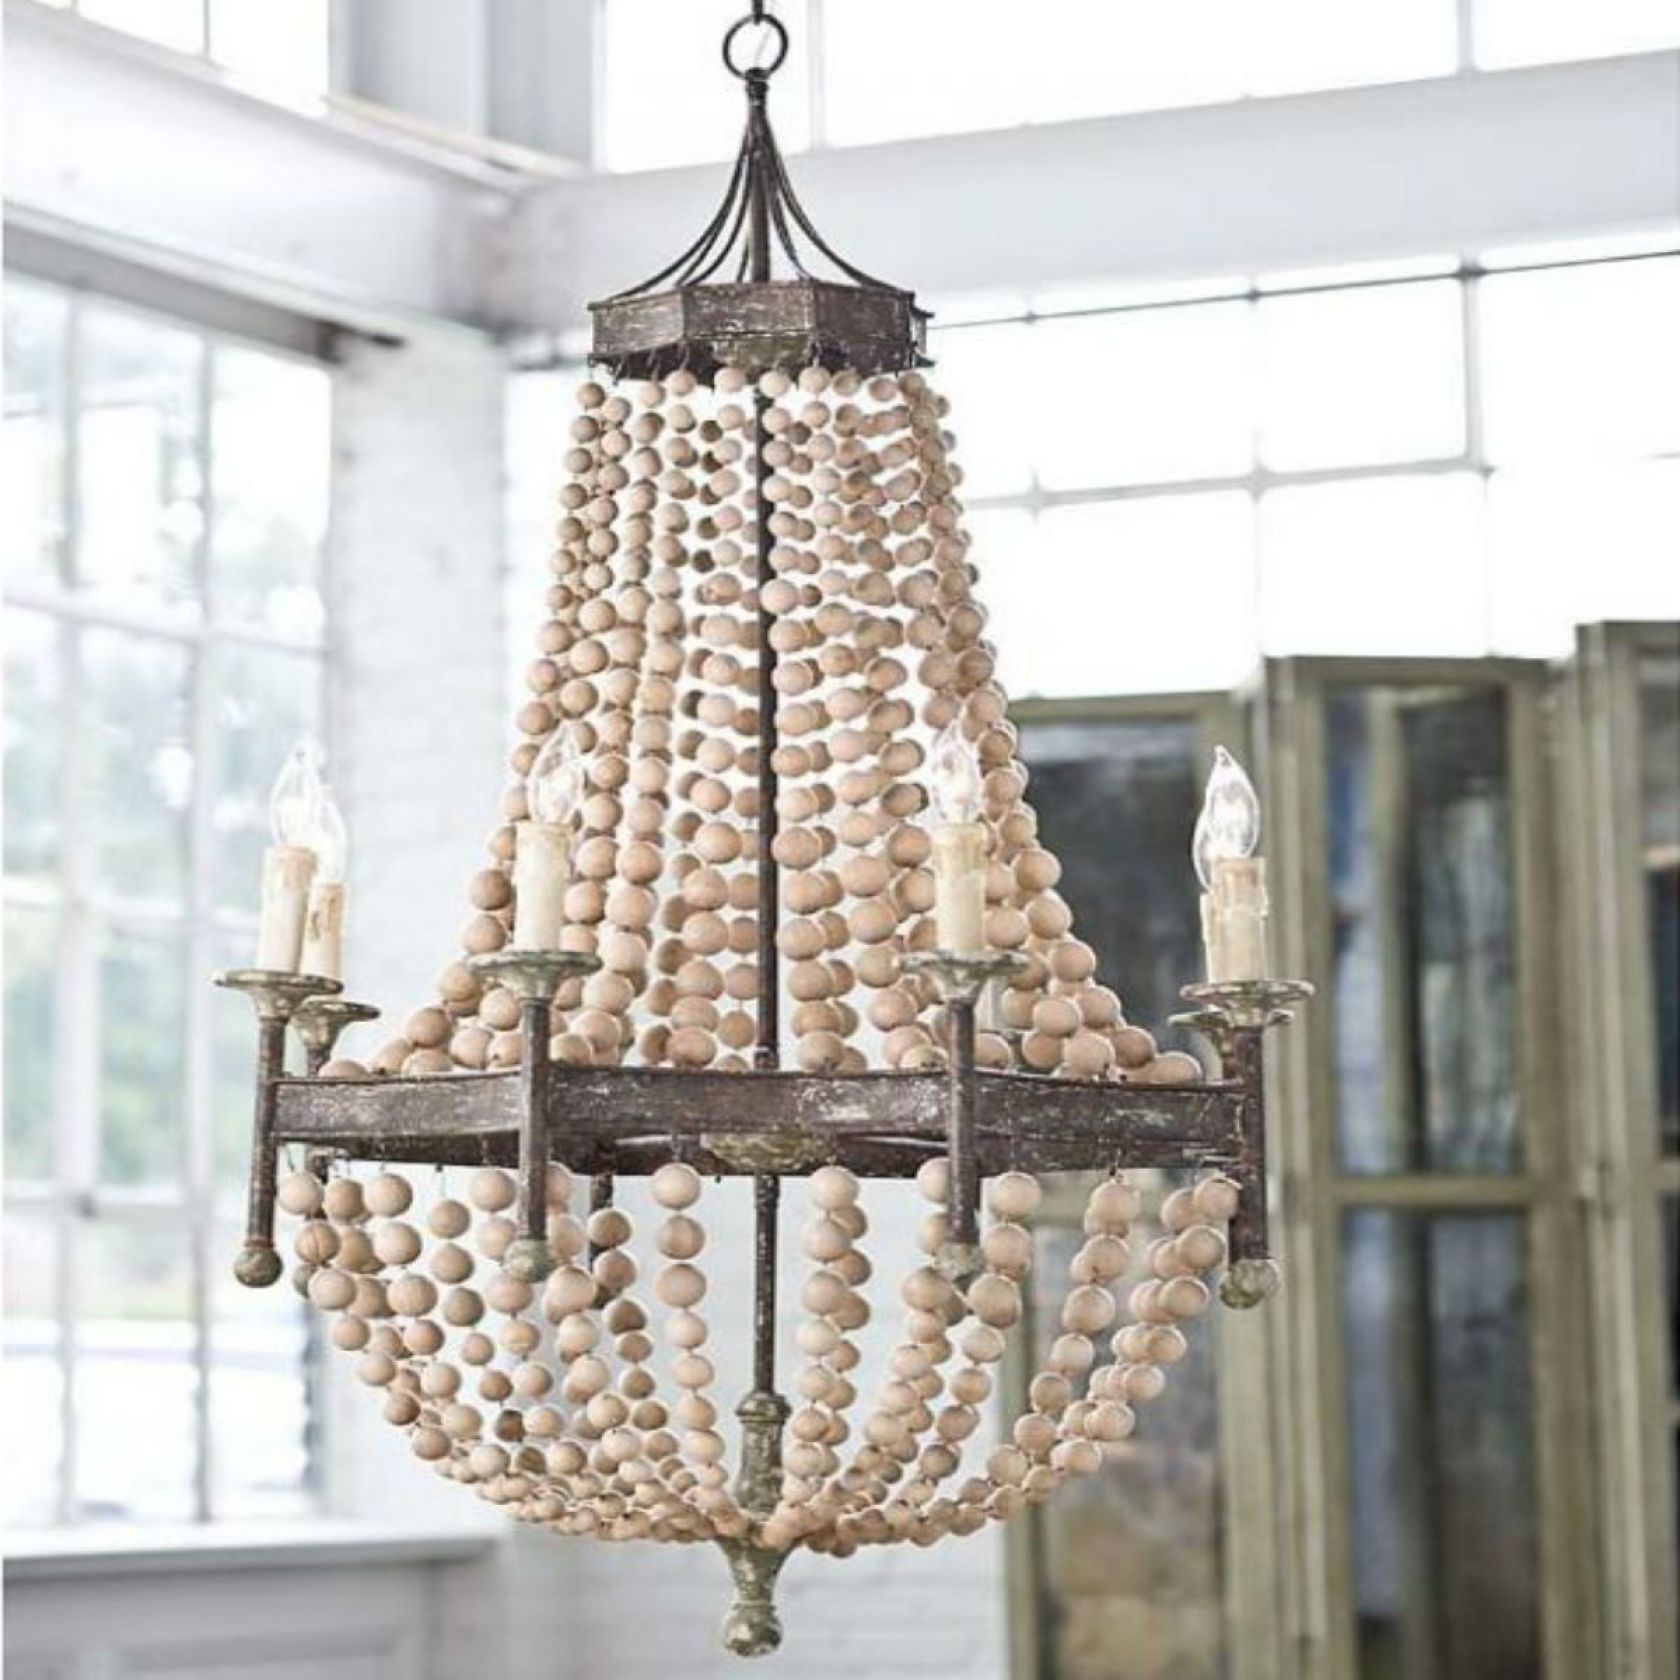 Coastal Chandeliers Iron Rope Driftwood Sea Glass Nautical Regarding Small Turquoise Beaded Chandeliers (View 6 of 25)